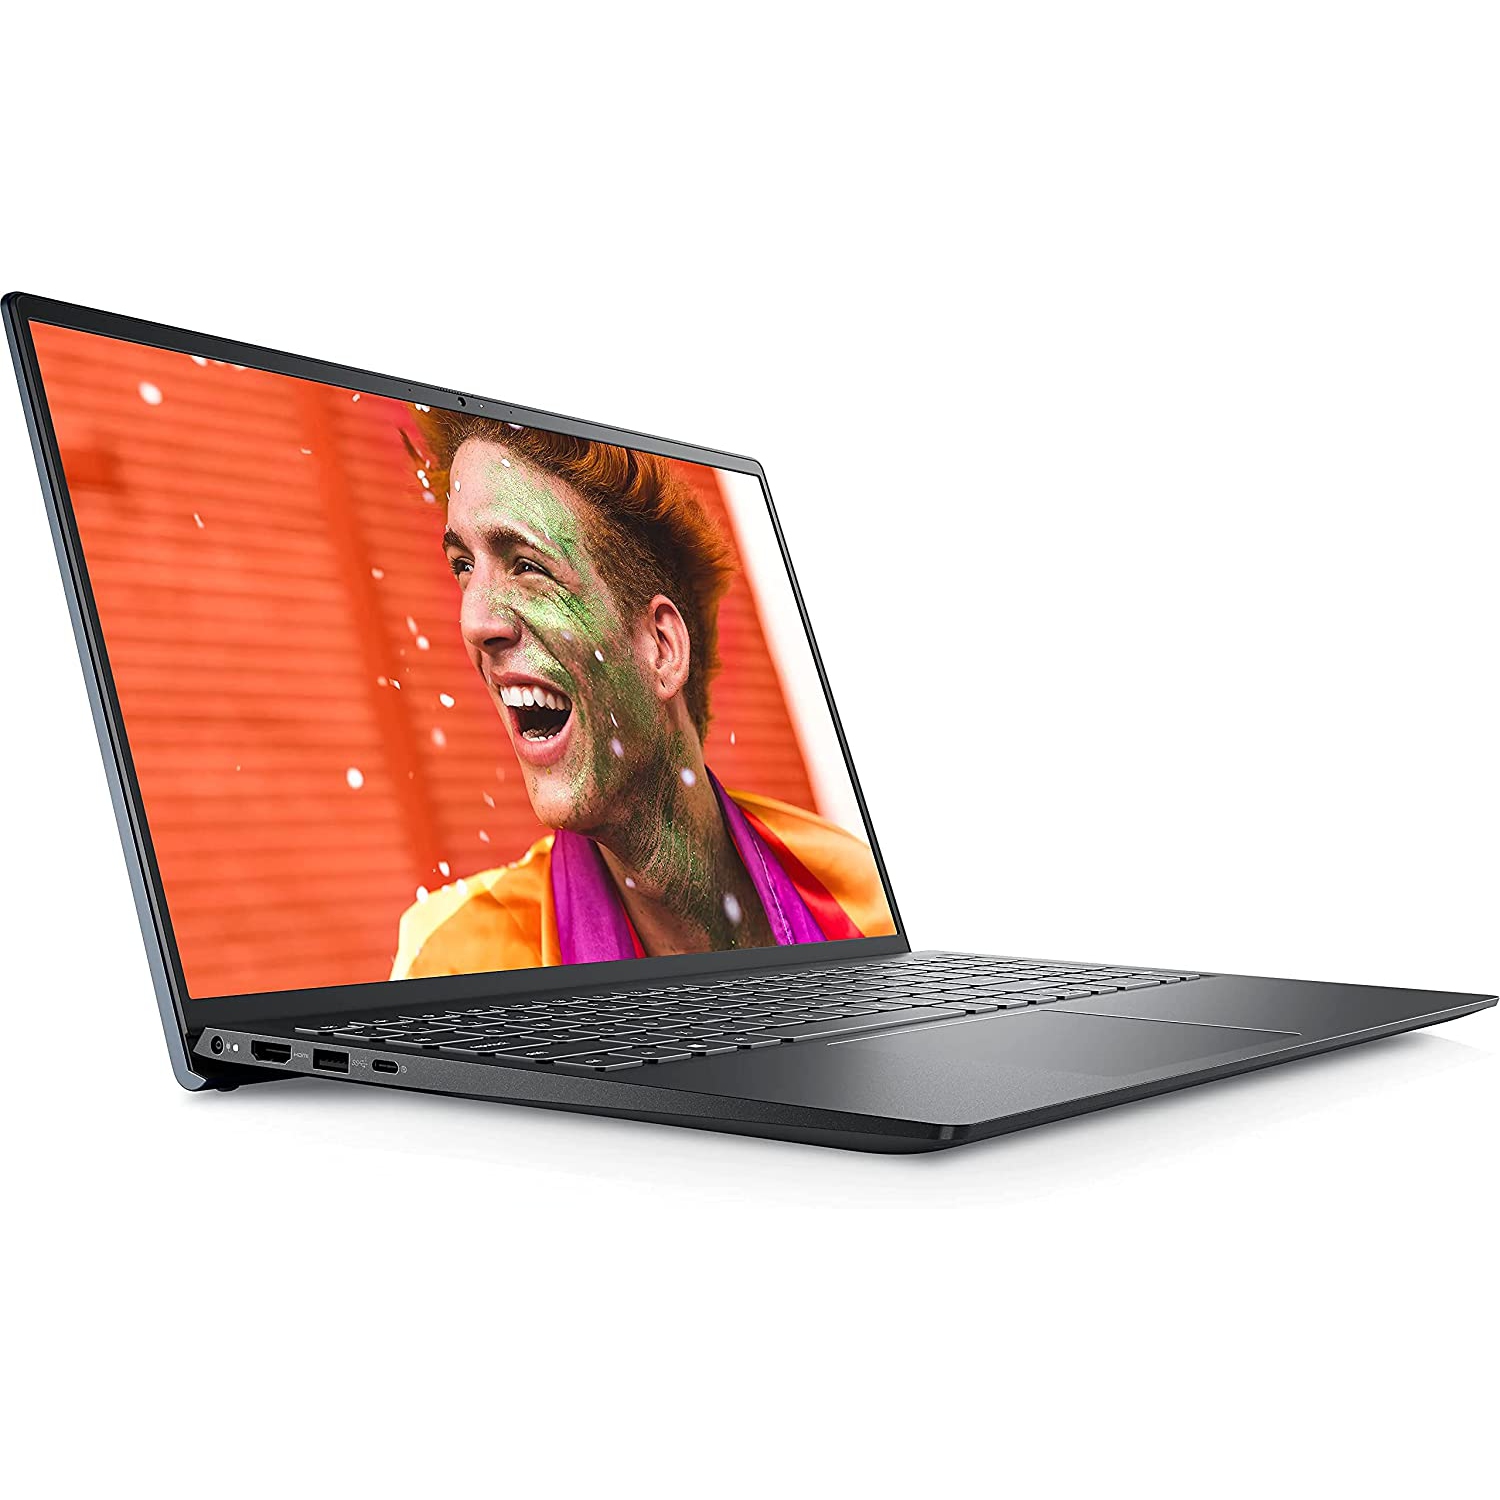 Refurbished (Excellent) - Dell Inspiron 5000 5515 Laptop (2021) | 15.6" FHD Touch | Ryzen 5 5500U - 256GB SSD - 8GB RAM | 6 Cores @ 2.1 GHz - Certified Refurbished